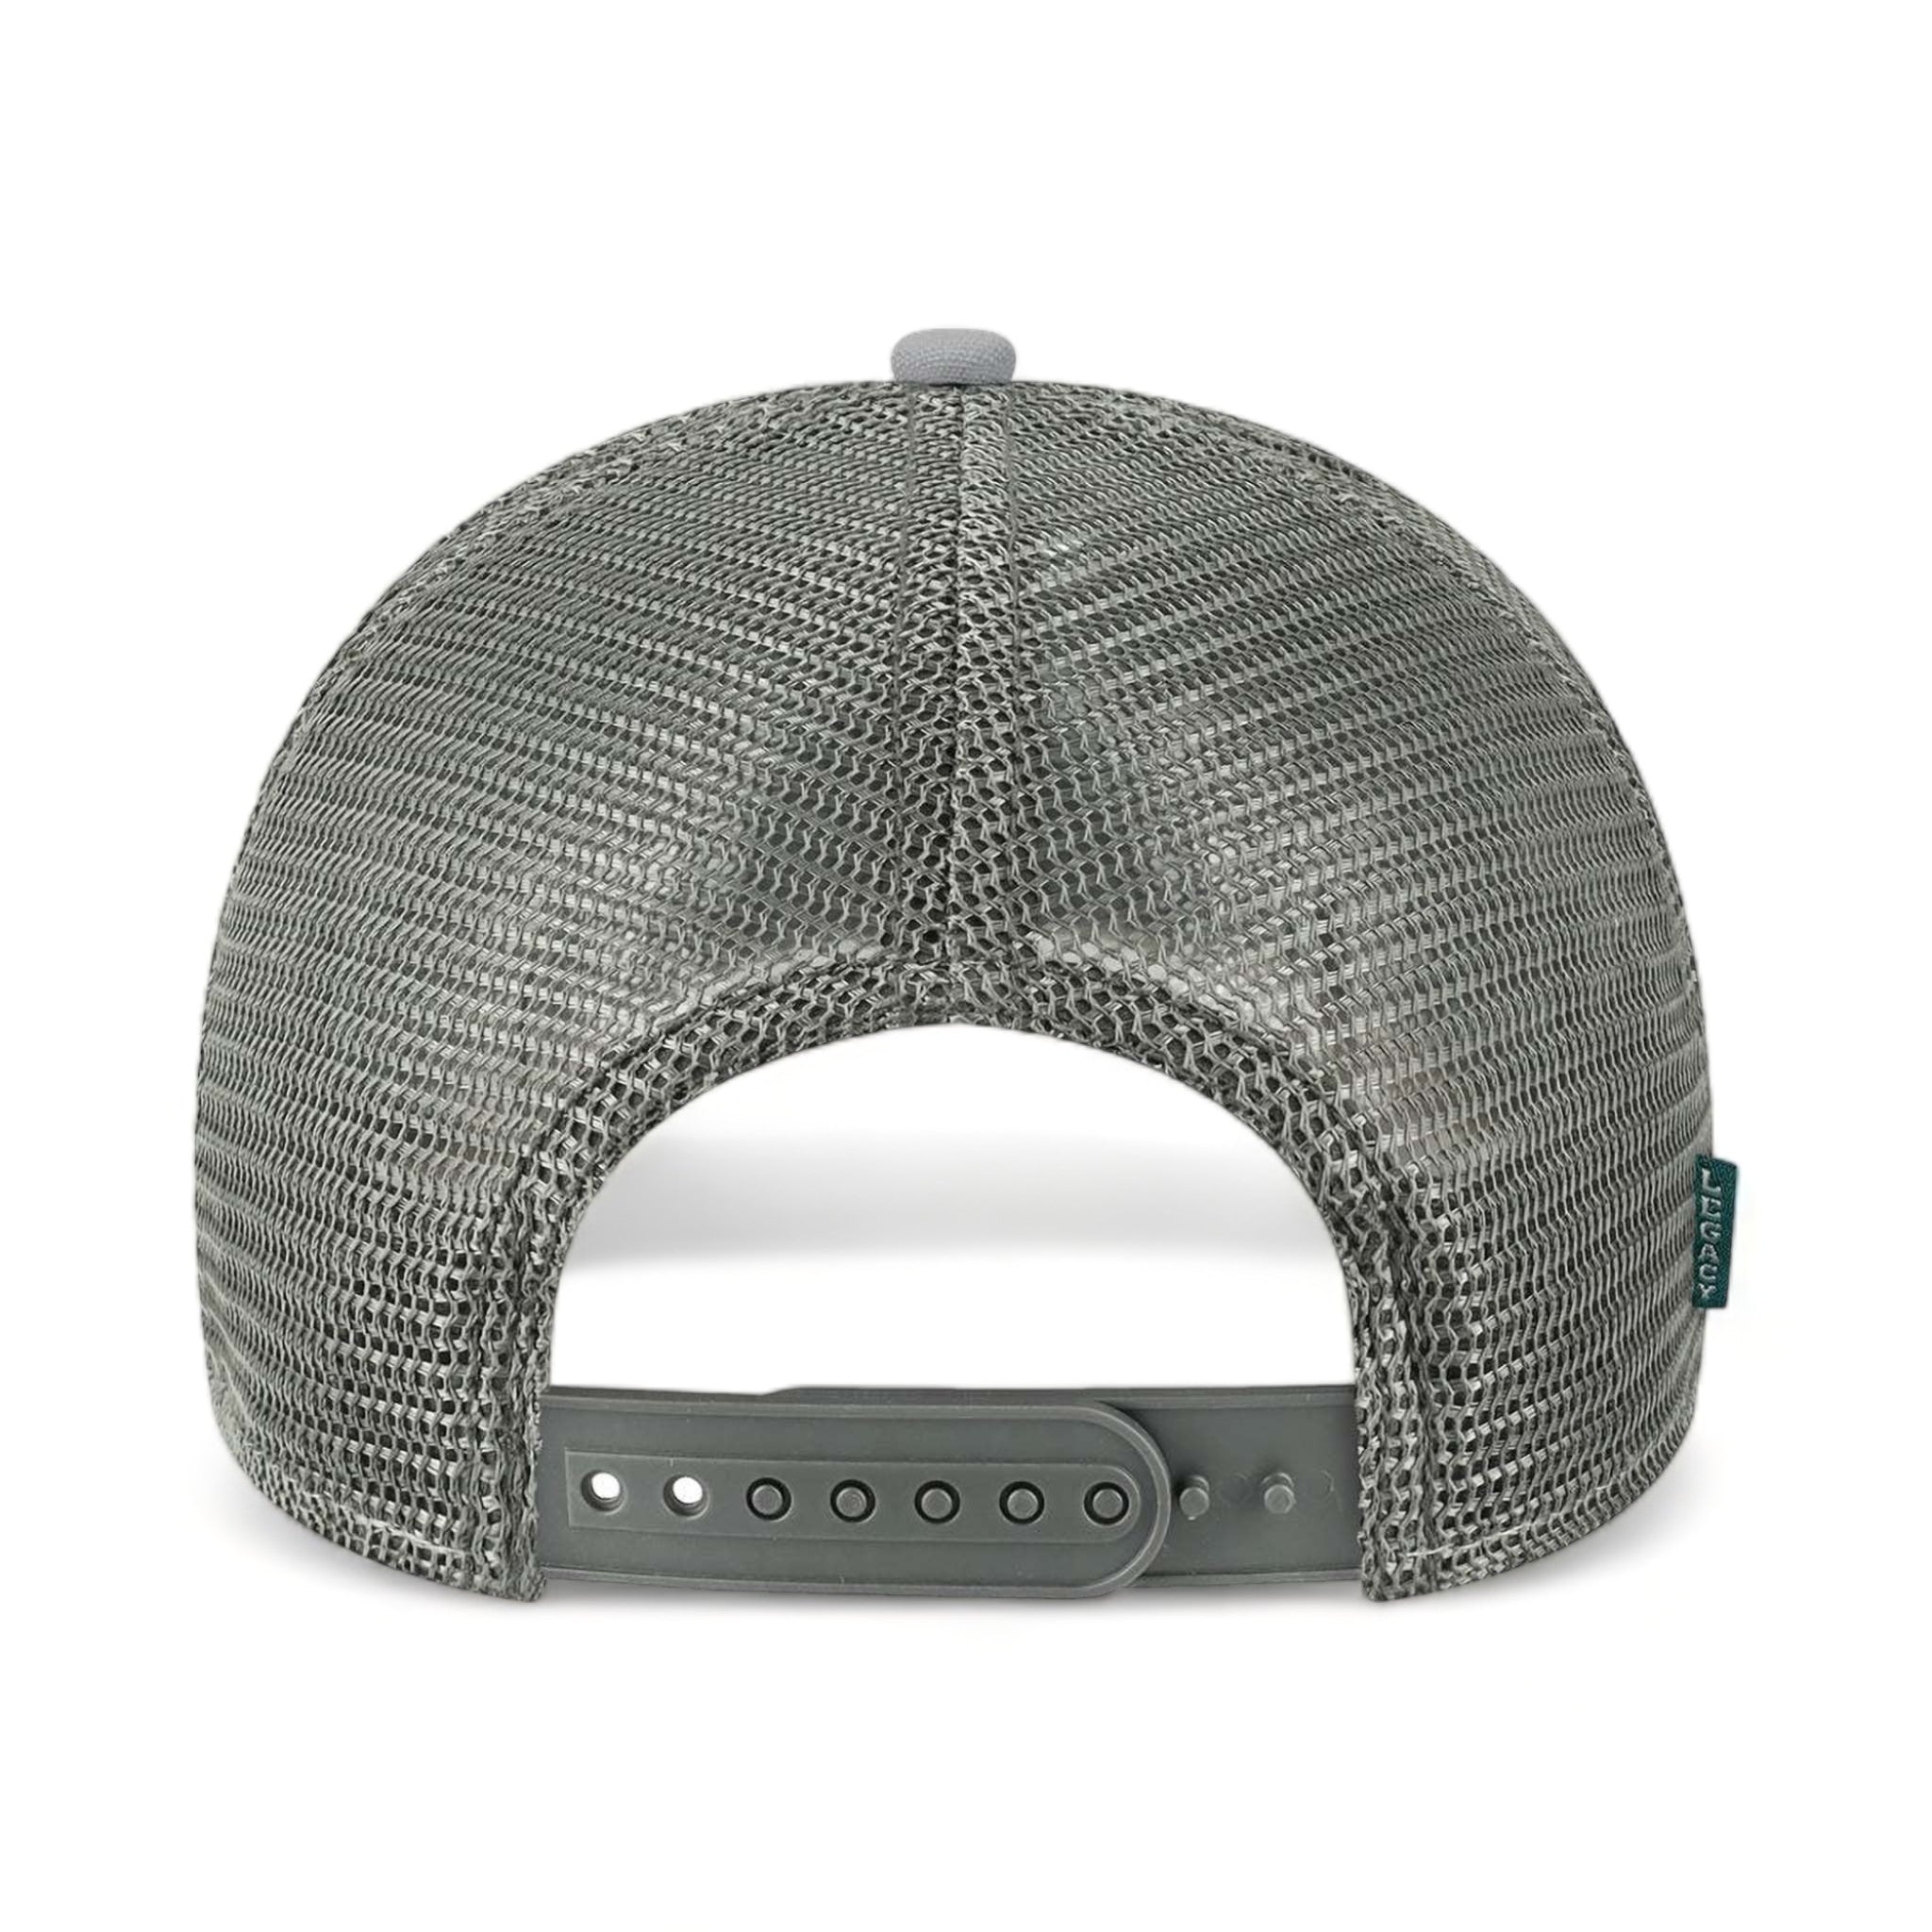 Back view of LEGACY MPS custom hat in light grey, salmon and dark grey